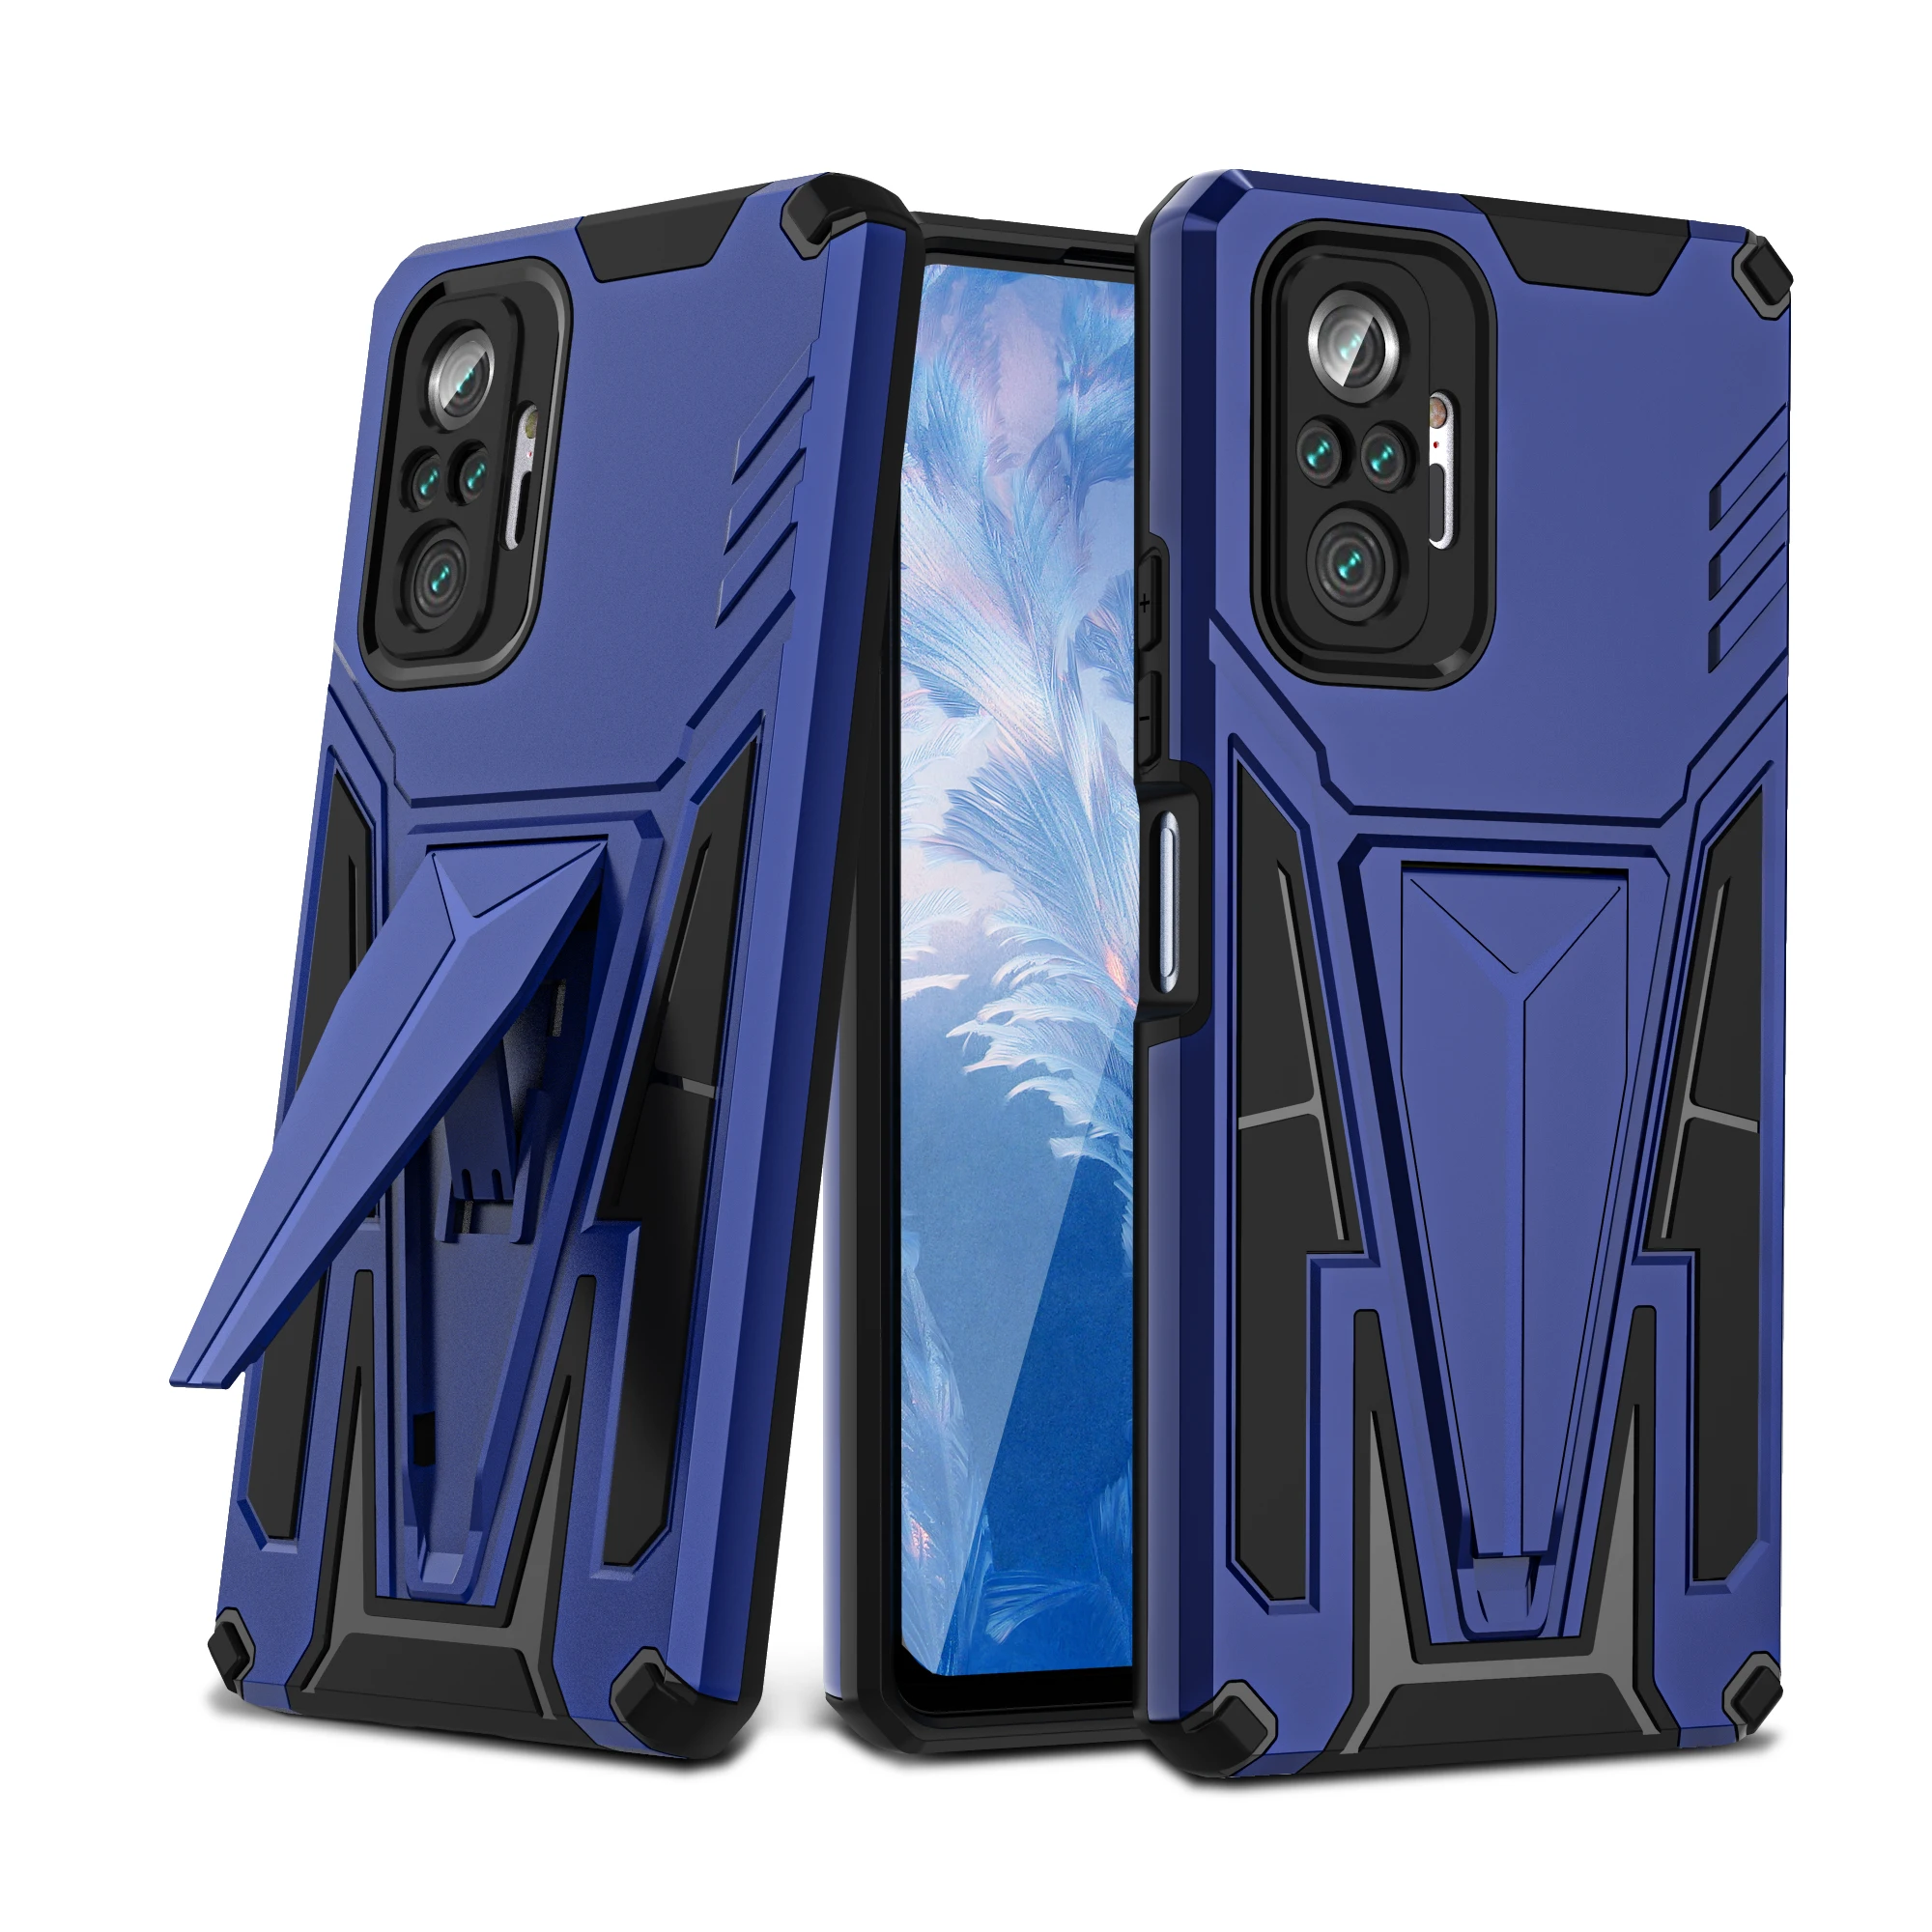 

Luxury Extraordinary V Armor Four-Corner Anti-Fall Magnetic Car Kickstand Case Cover For Xiaomi Redmi note10 Pro, As pictures